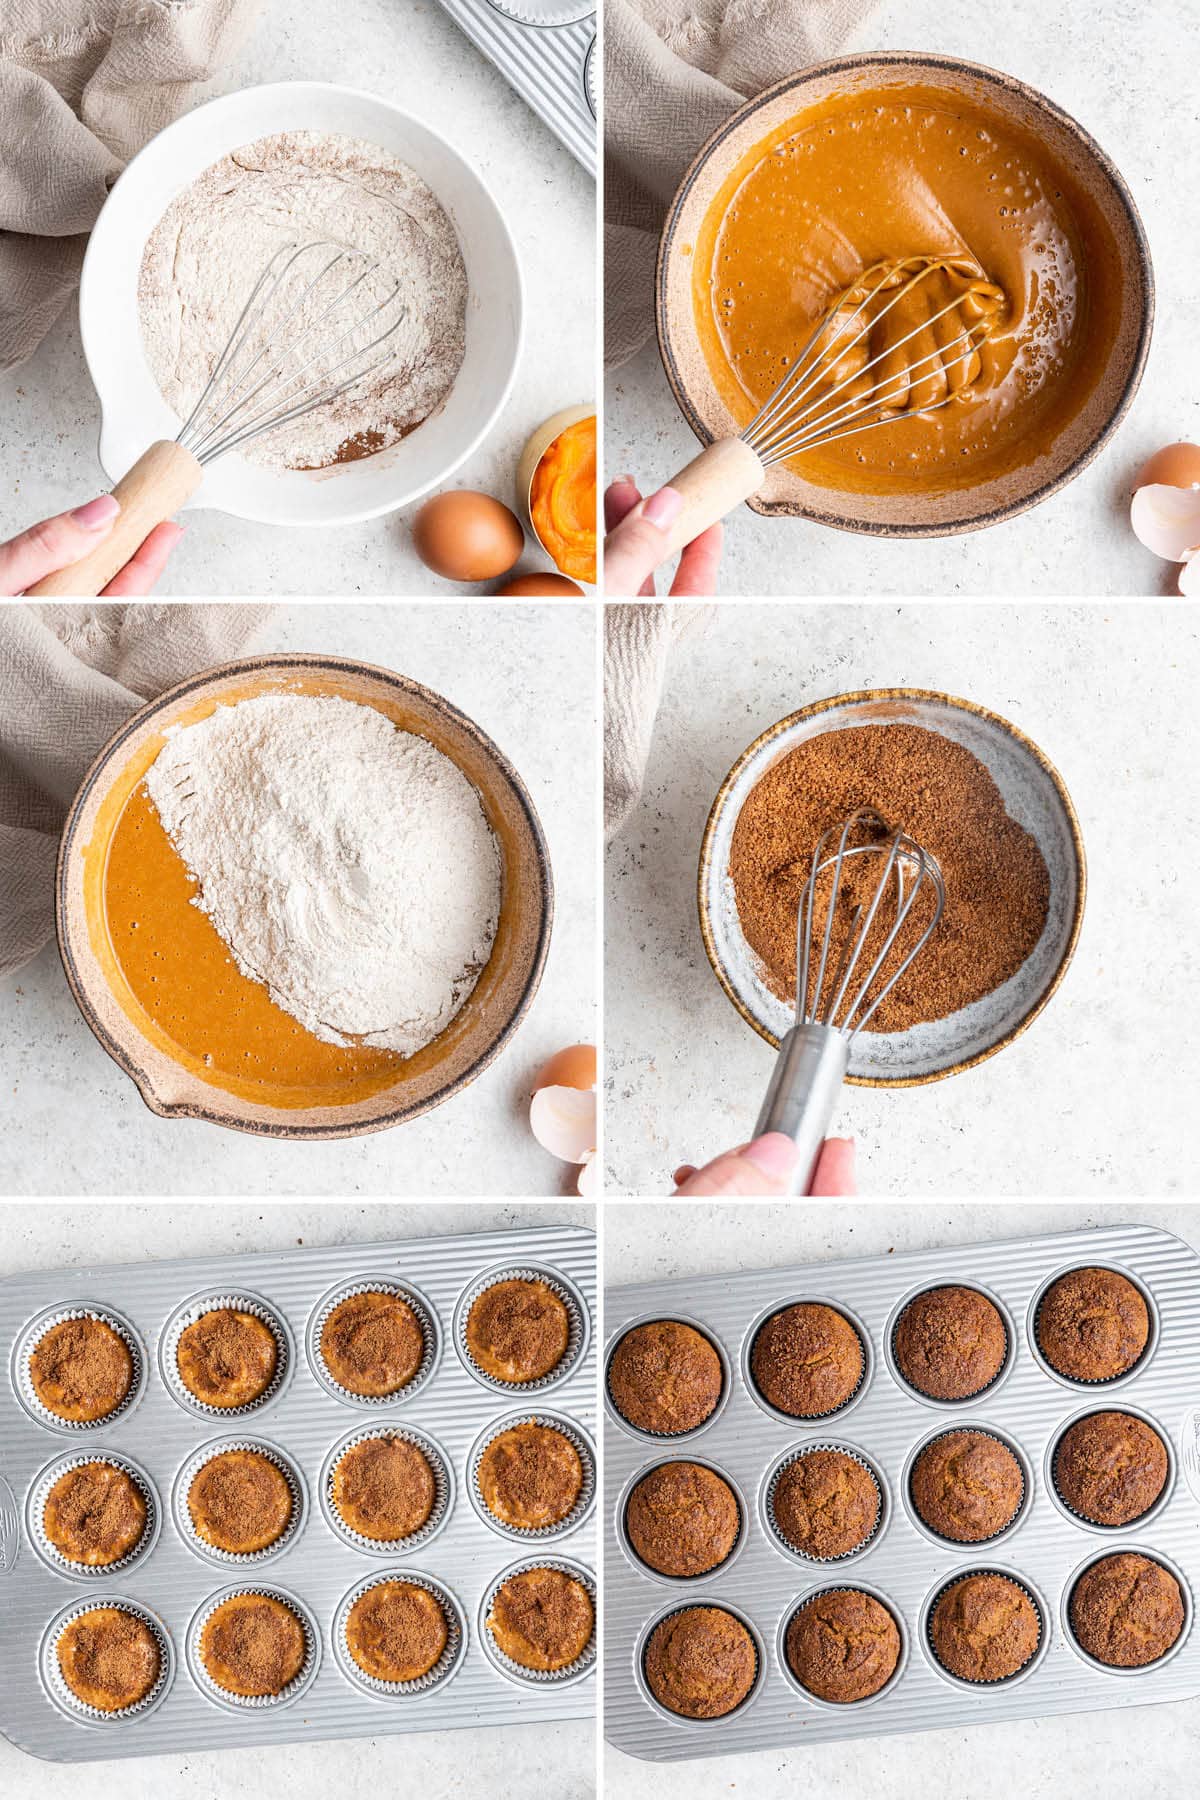 Collage of six photos showing how to make Healthy Sweet Potato Muffins: mixing the batter and then baking the muffins and topping with cinnamon sugar.